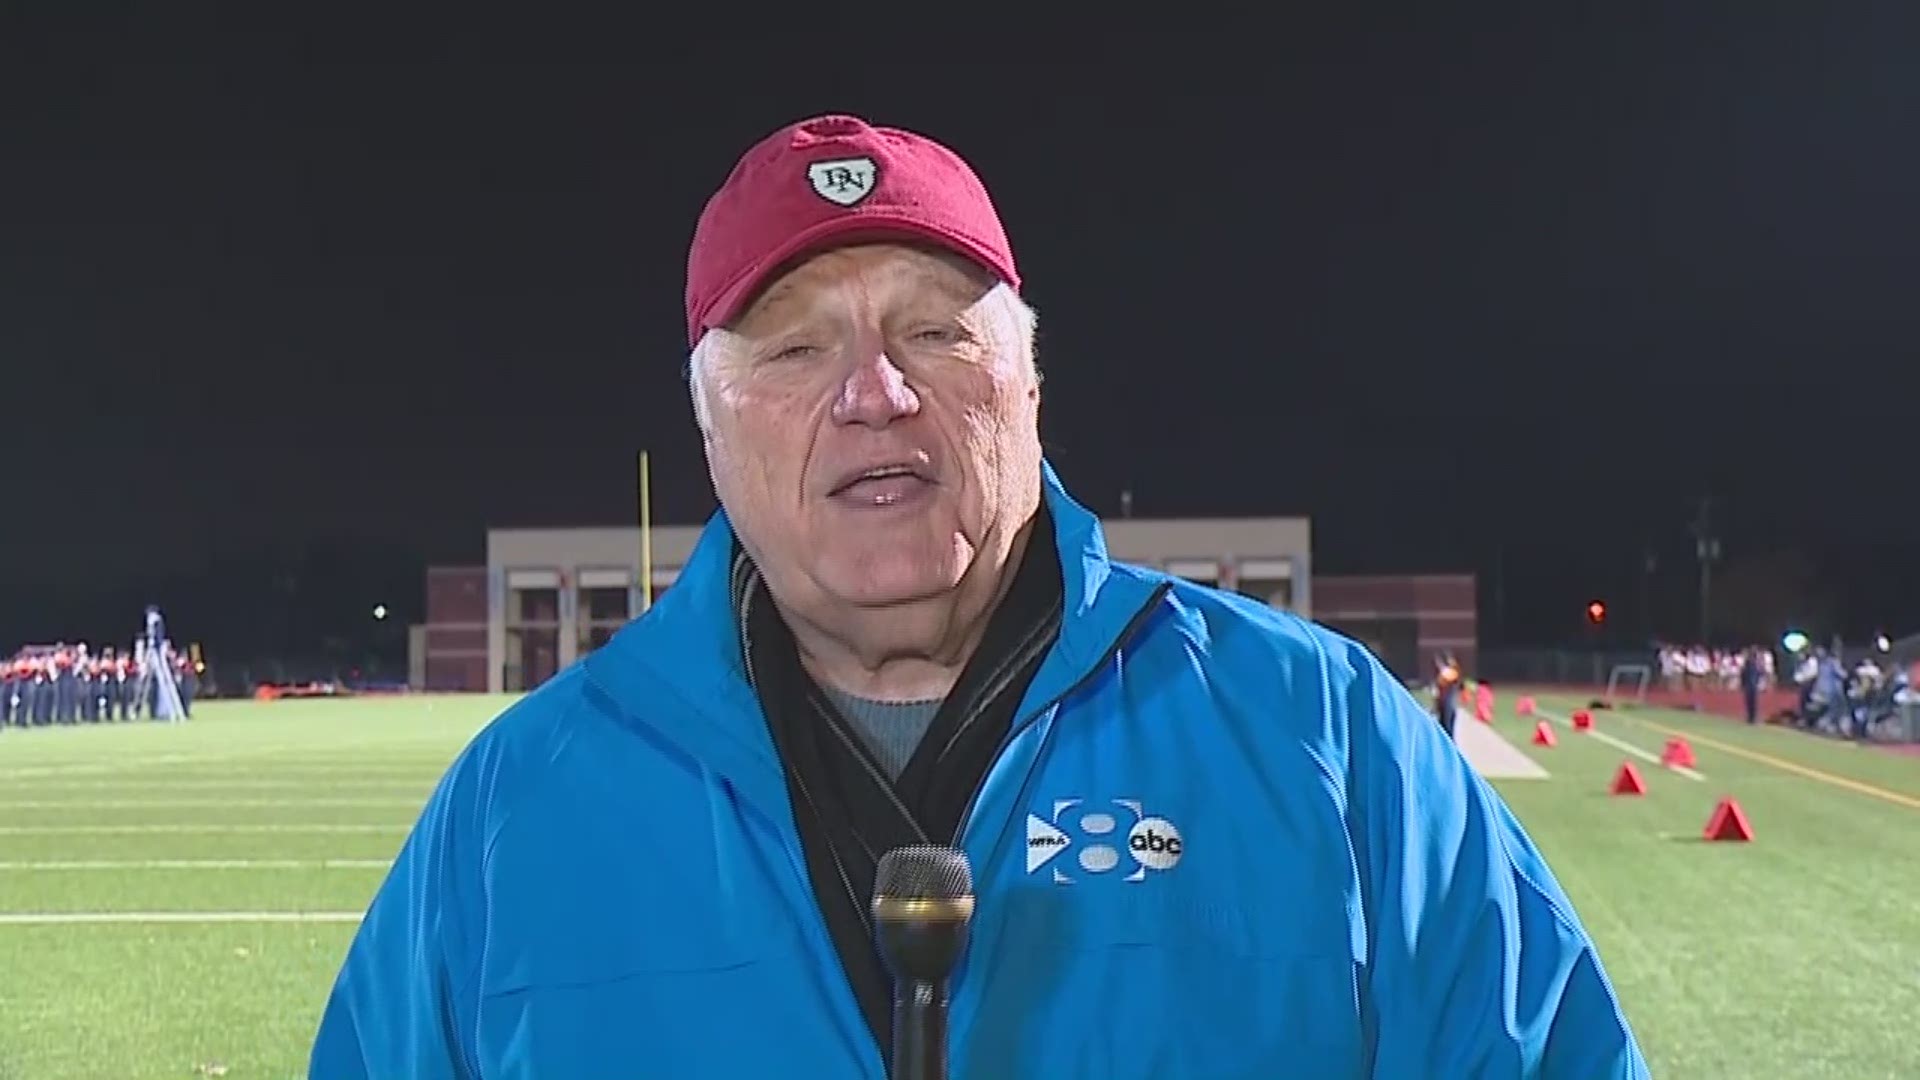 It's Friday night and Dale Hansen is at our game of the week: Lancaster vs. McKinney North.